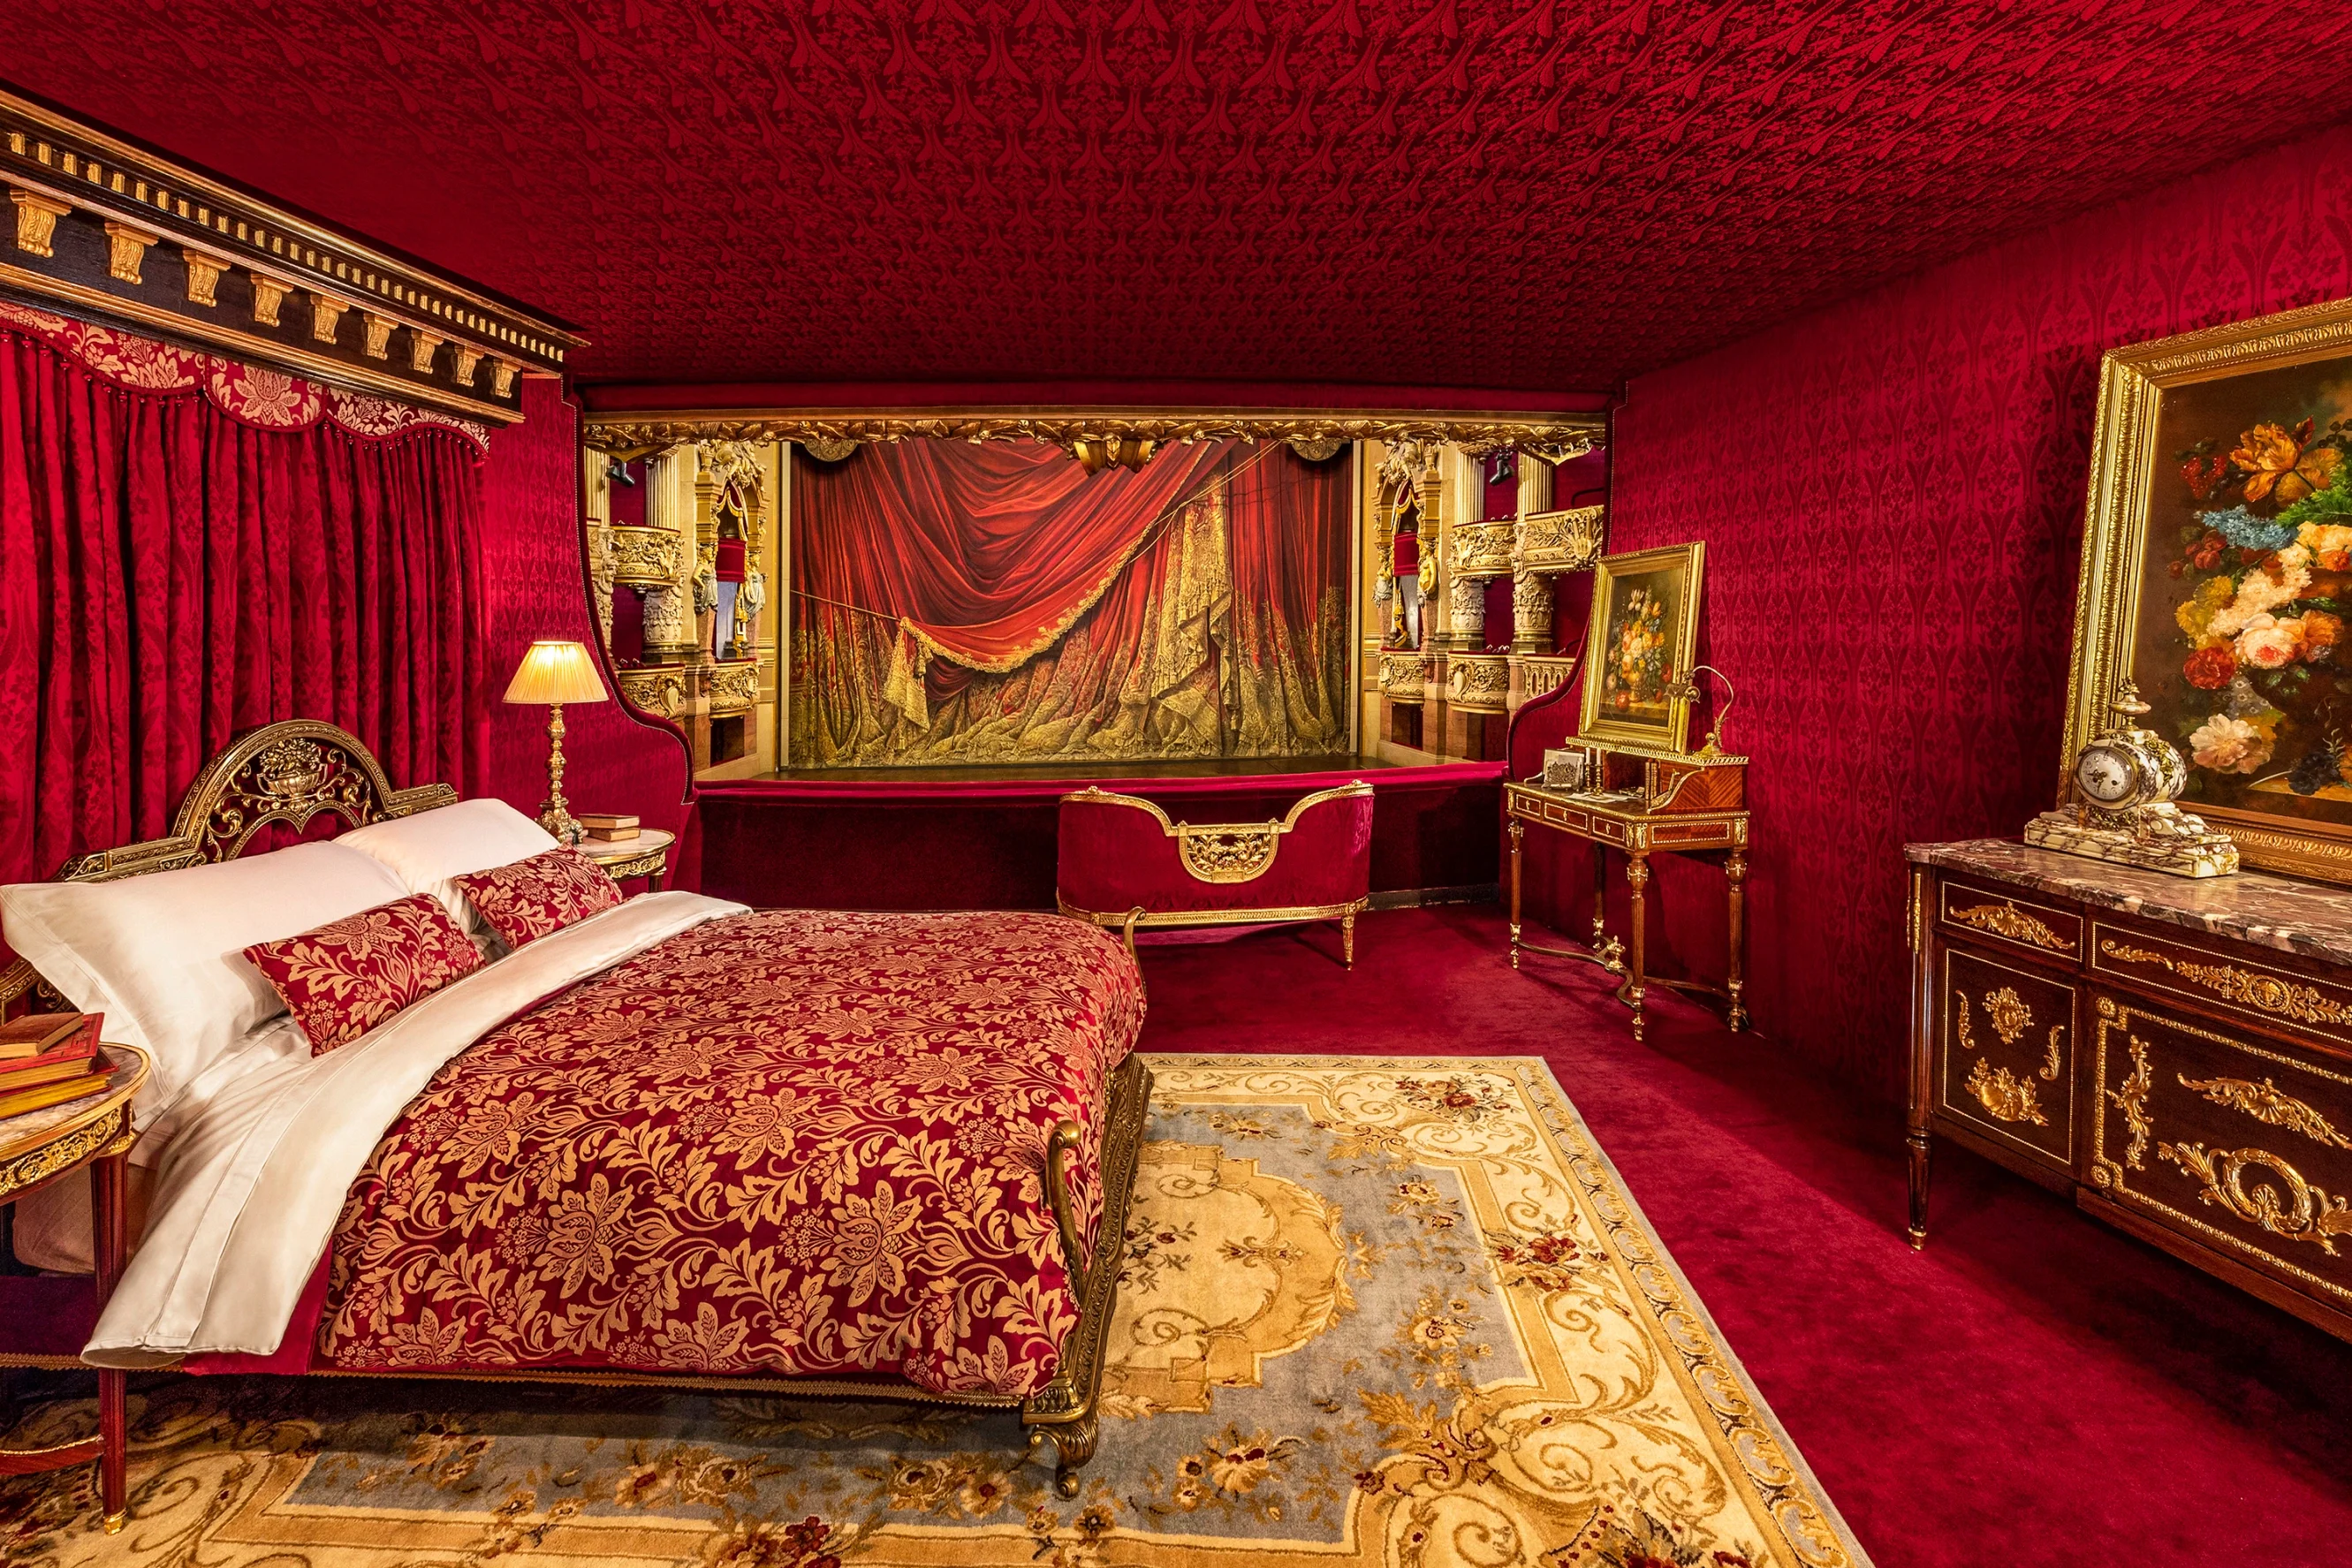 Guests will sleep in the ‘Box of Honour’ within the opera house’s auditorium